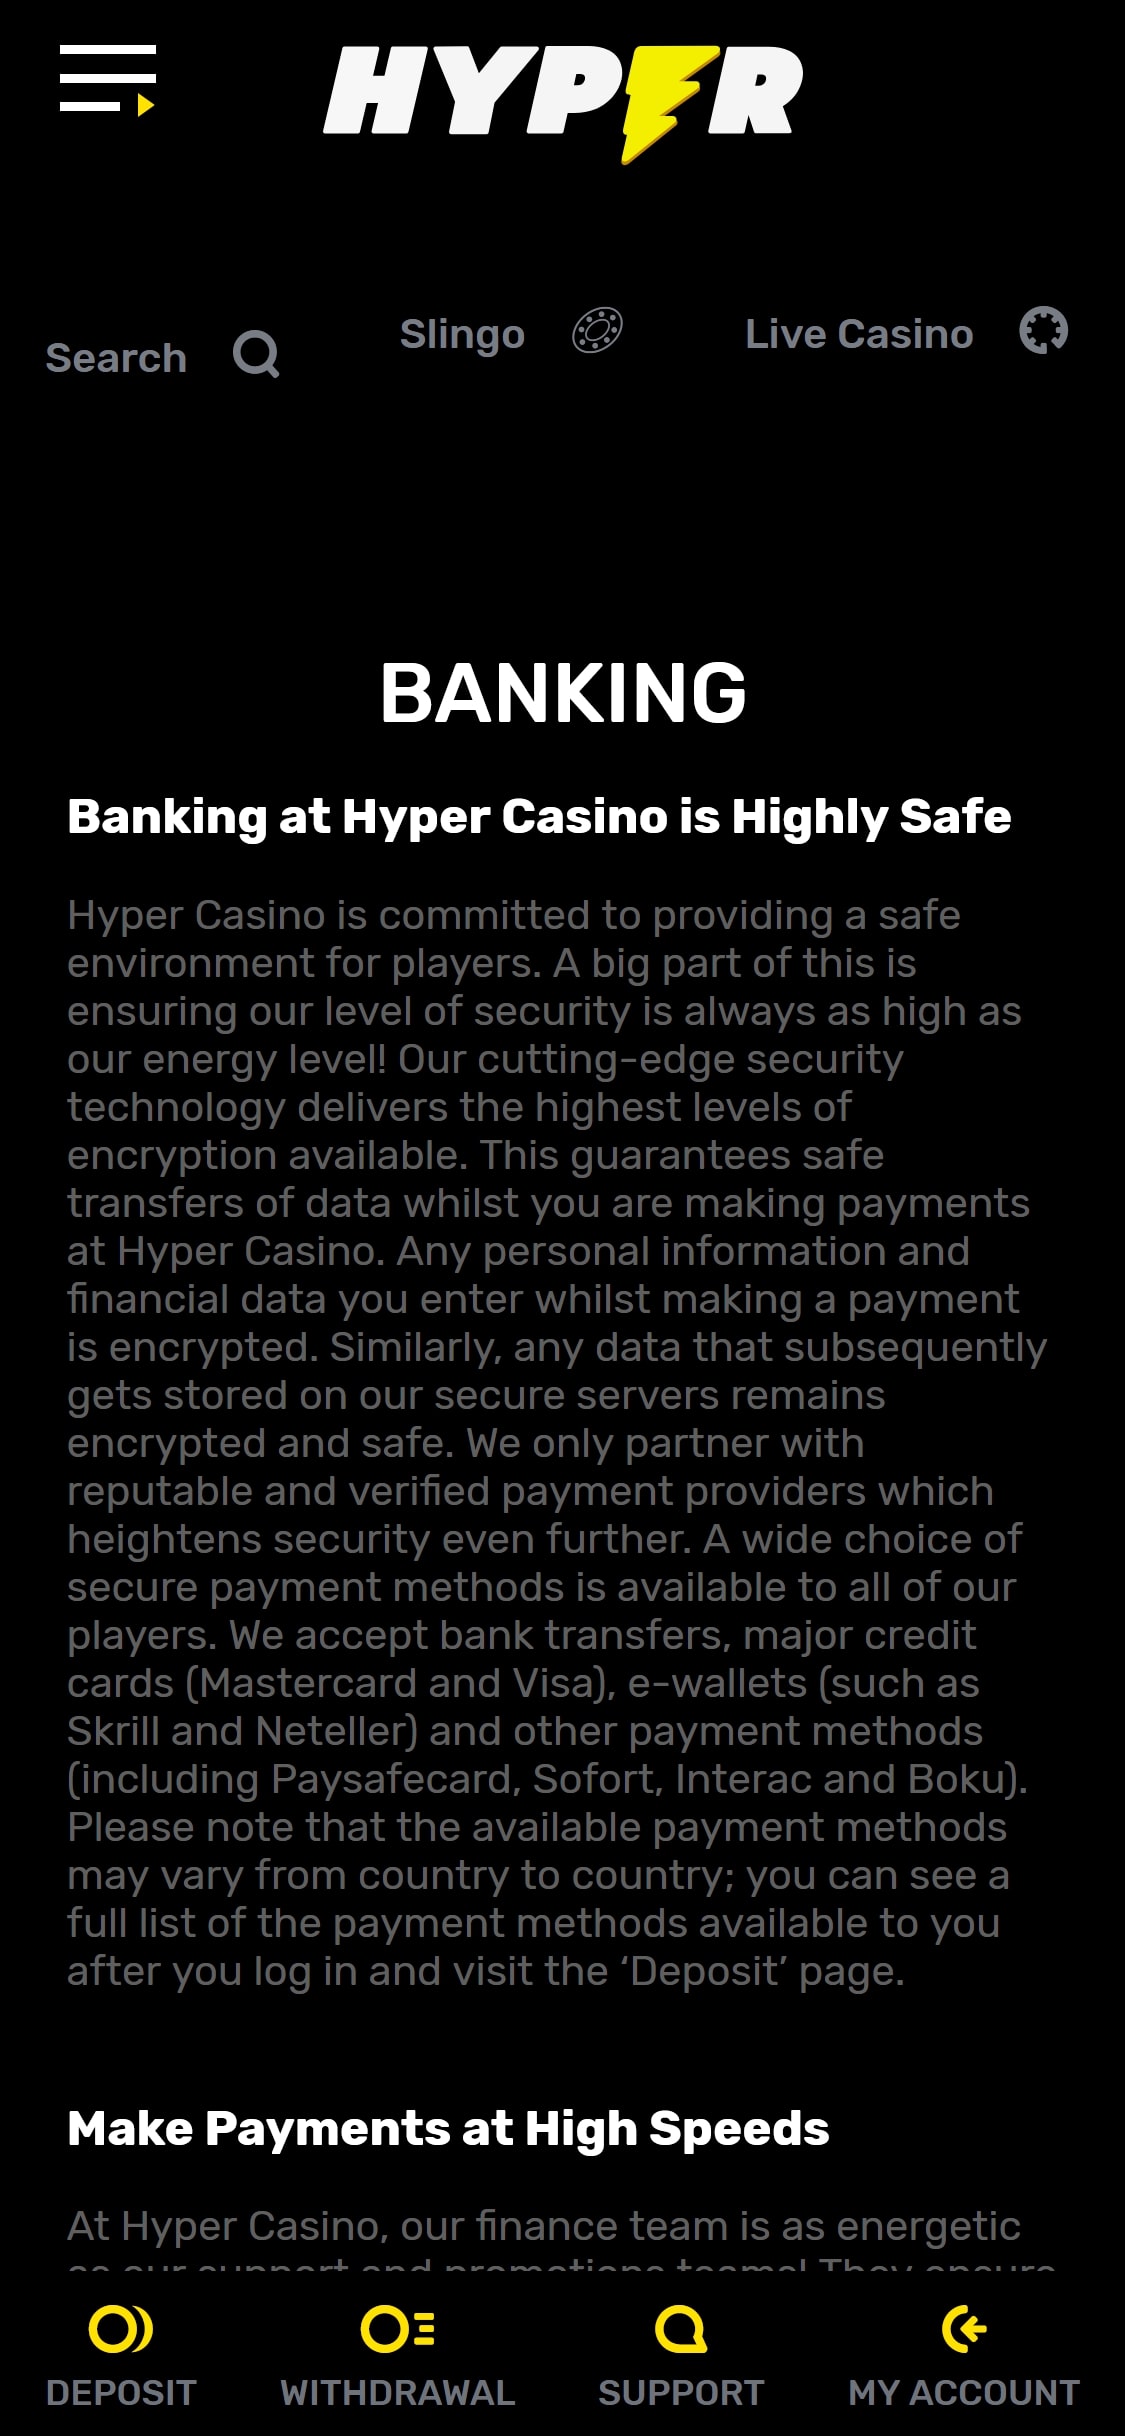 Hyper Casino Mobile Payment Methods Review